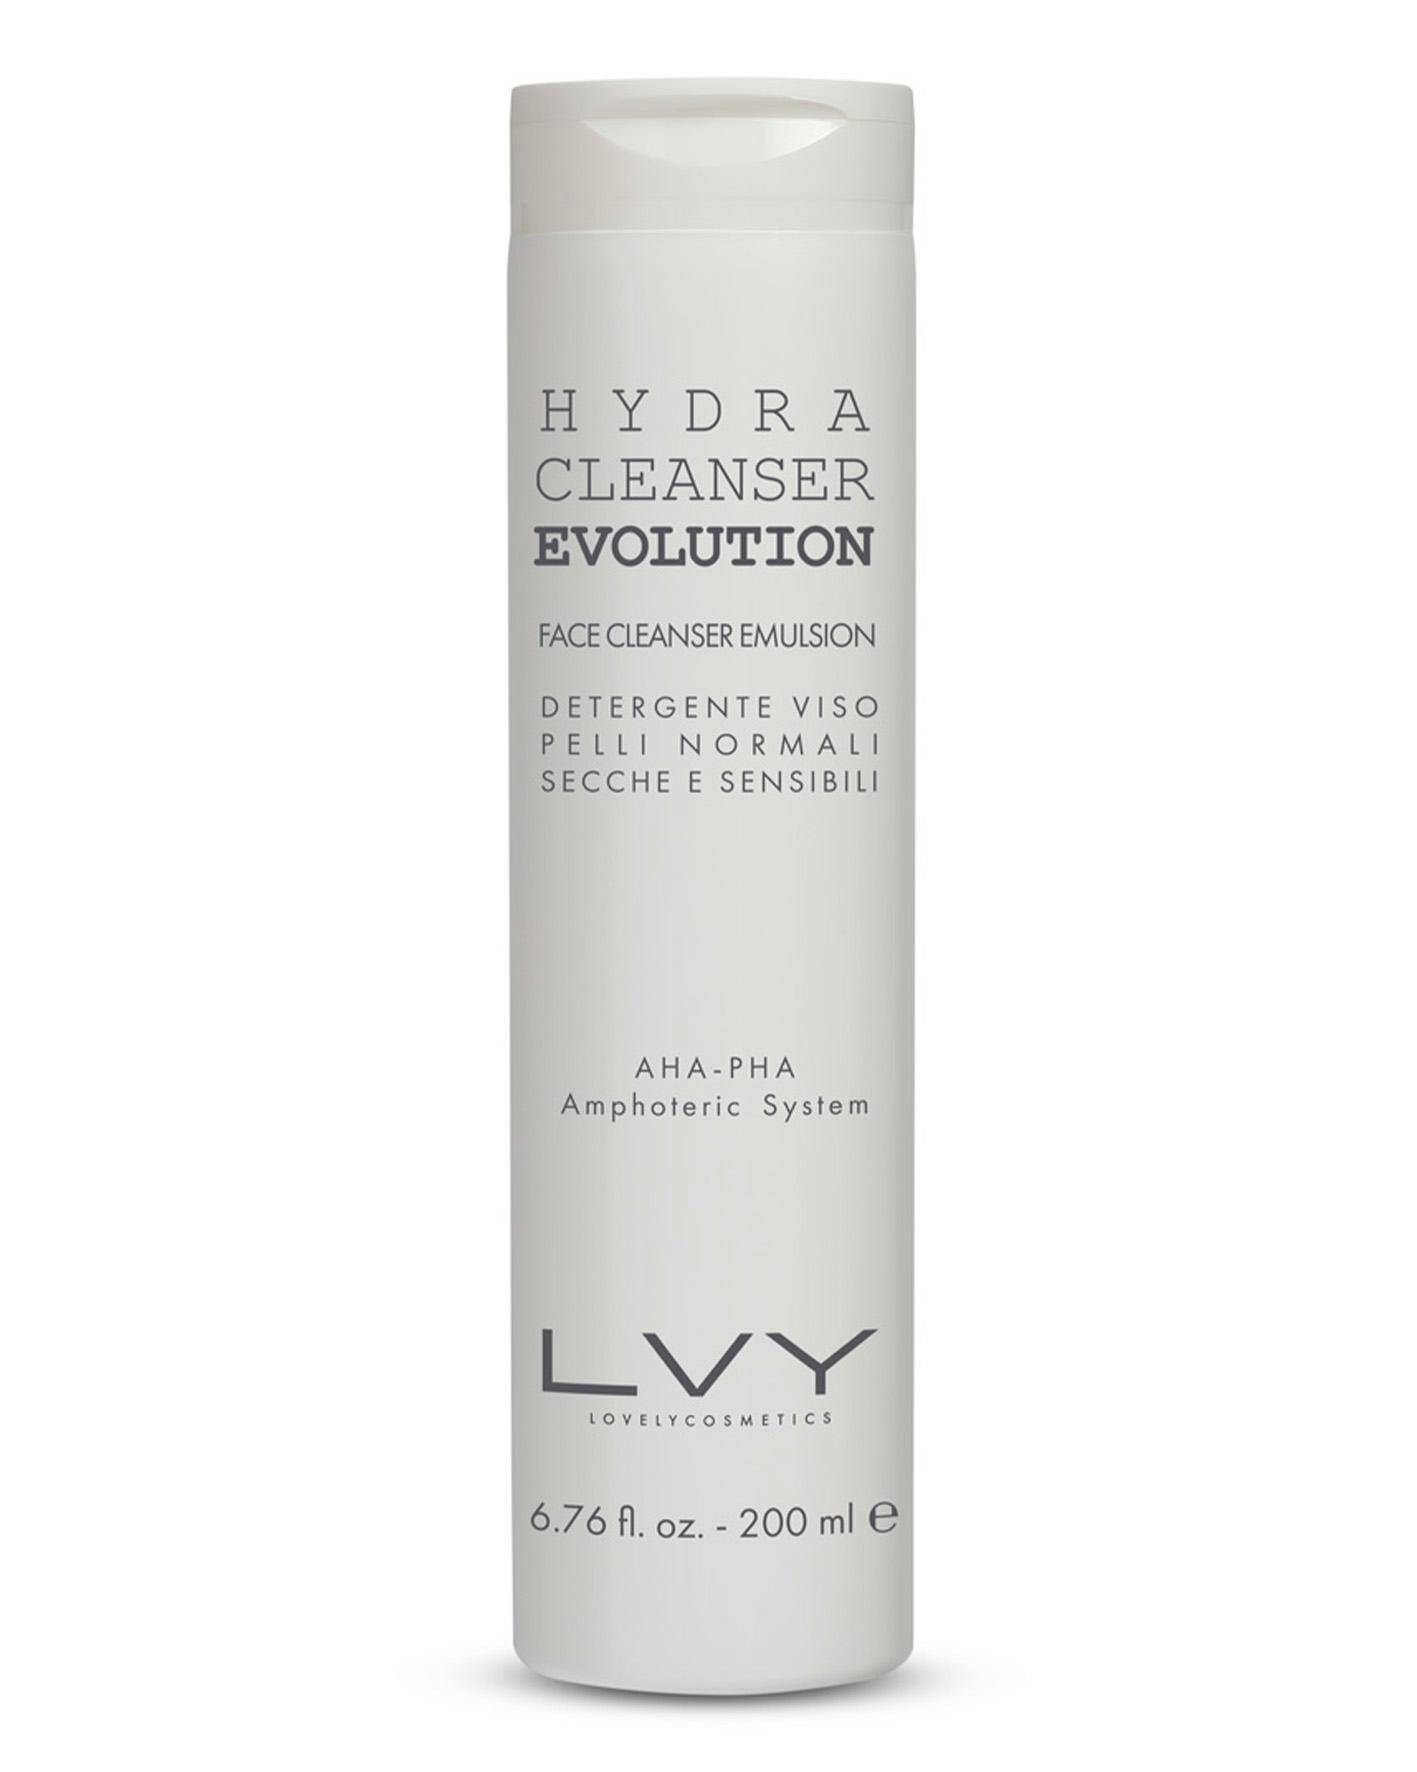 LVY Cleanser Perfect 200ml Home